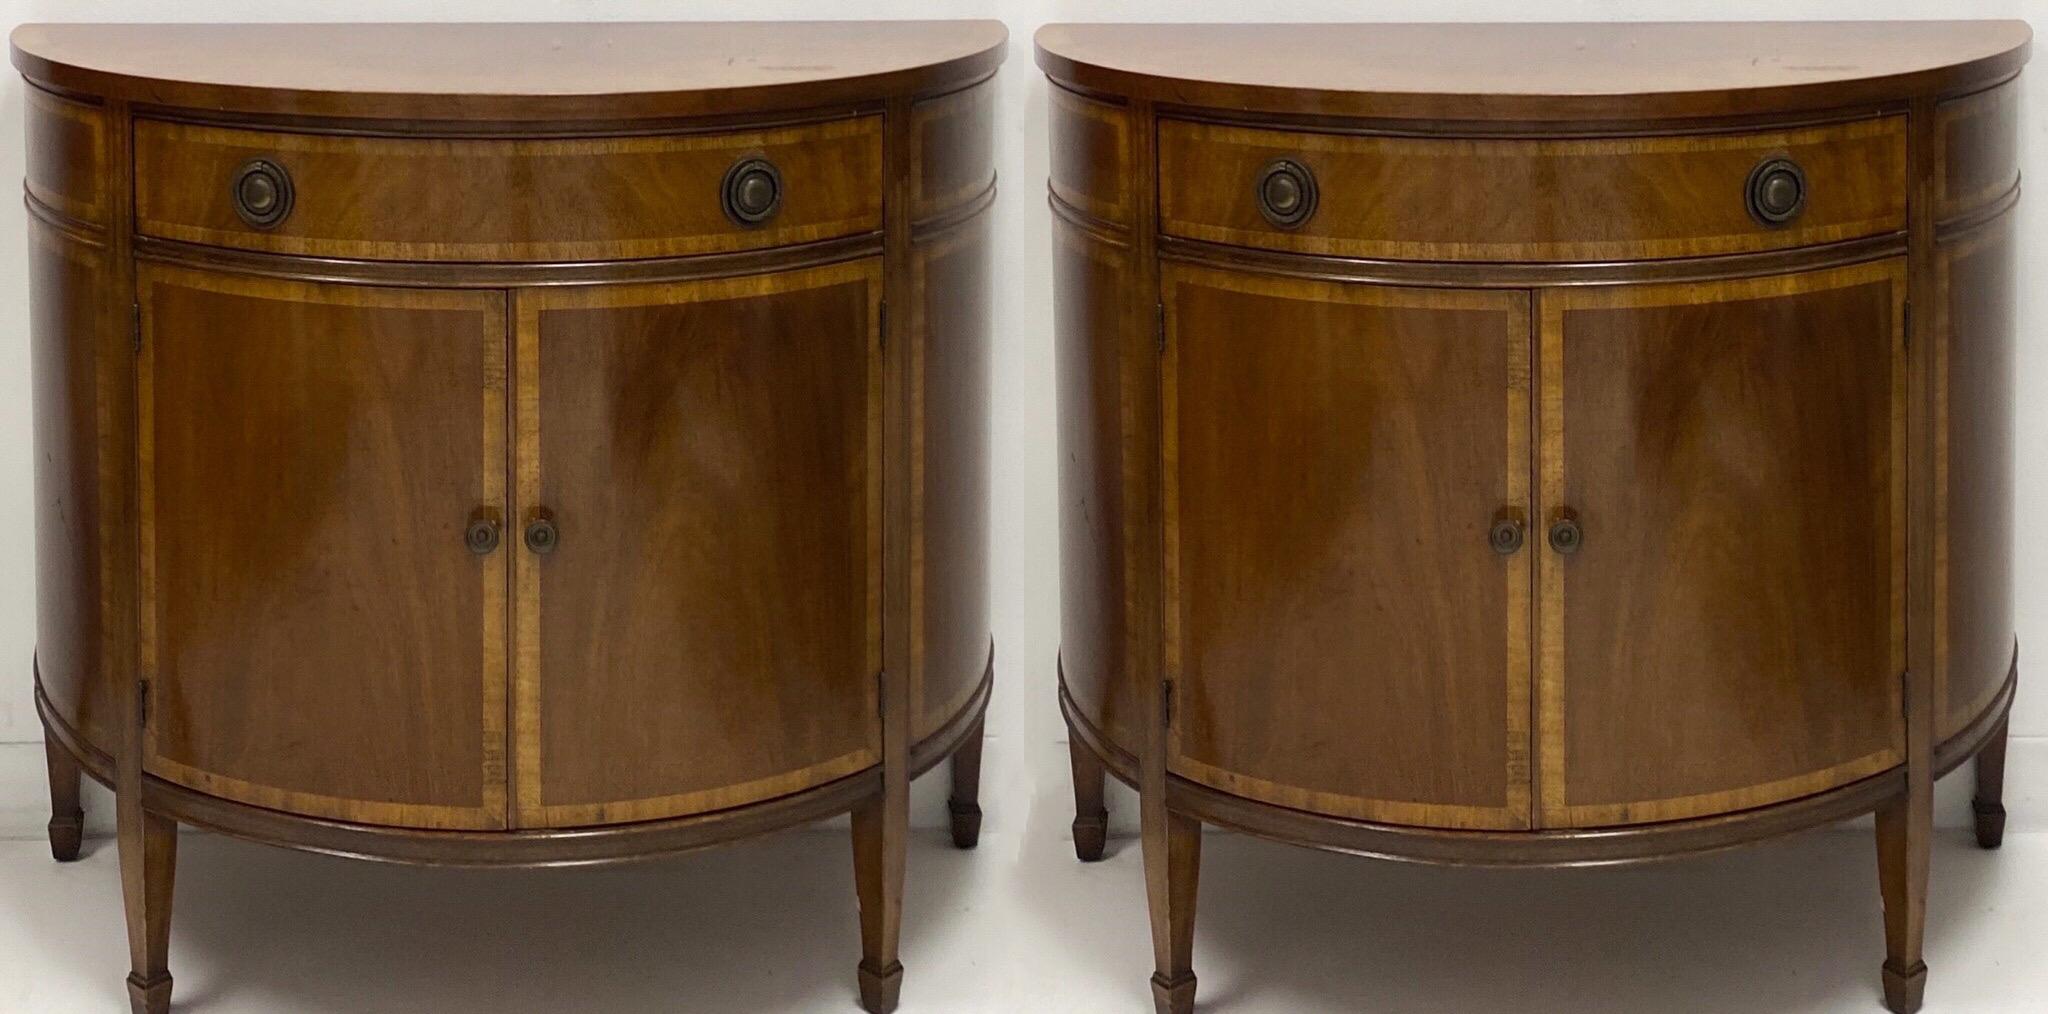 Brass Mid-Century Inland Mahogany Demilune Cabinets by Johnson Furniture Co., Pair